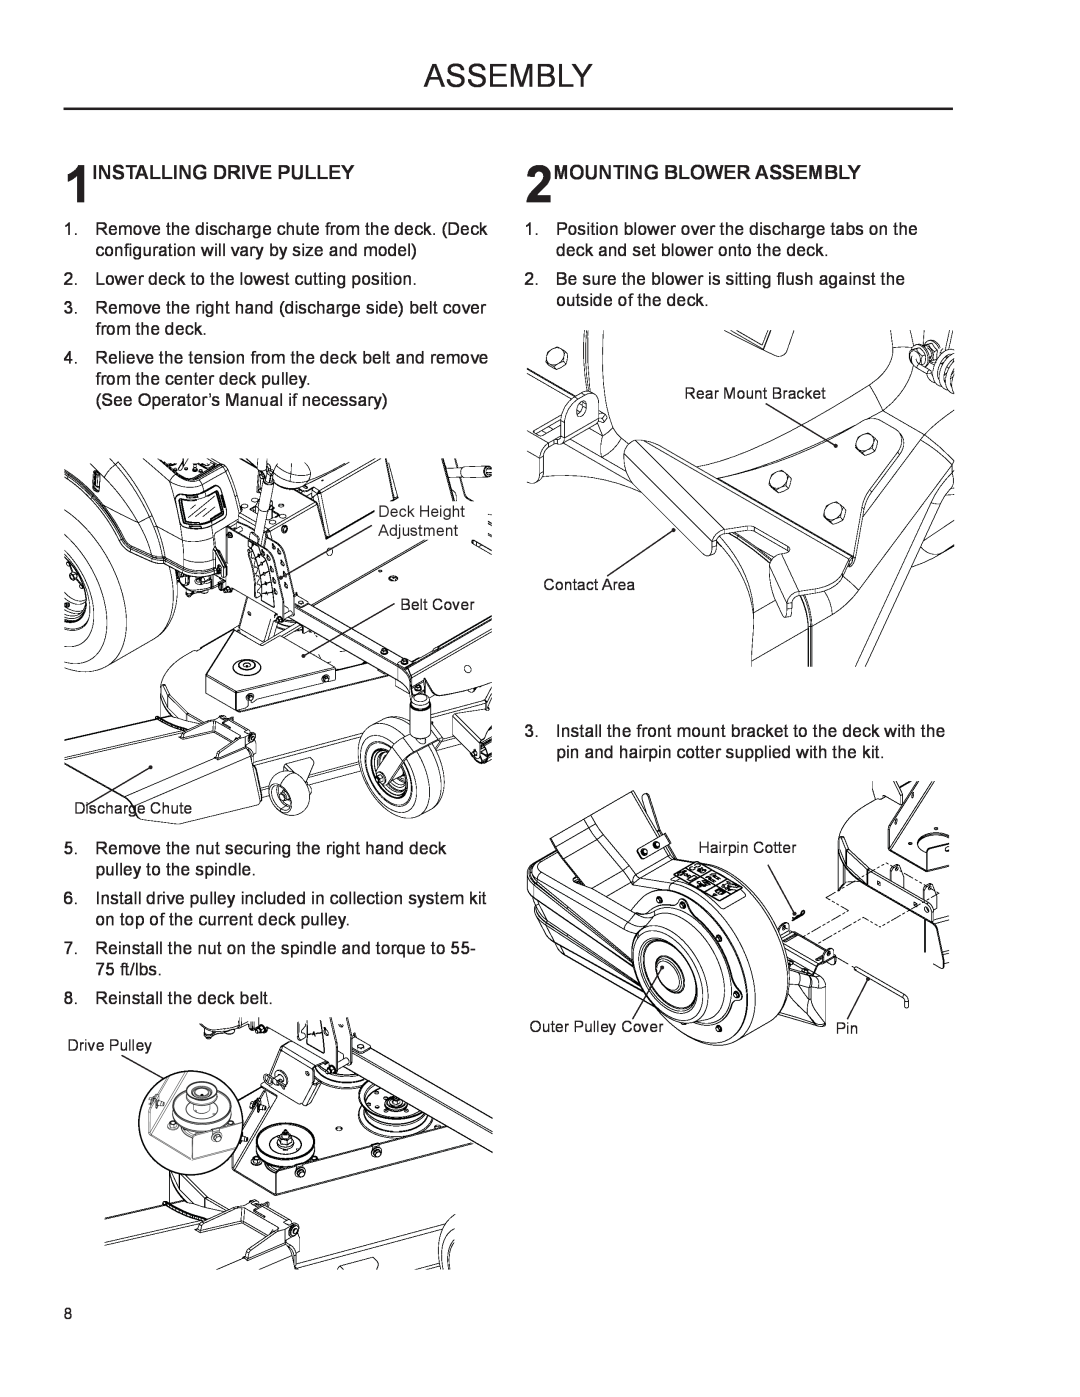 Husqvarna 2009-01, 966004501 manual Assembly, 1INSTALLING DRIVE PULLEY, 2MOUNTING BLOWER ASSEMBLY 